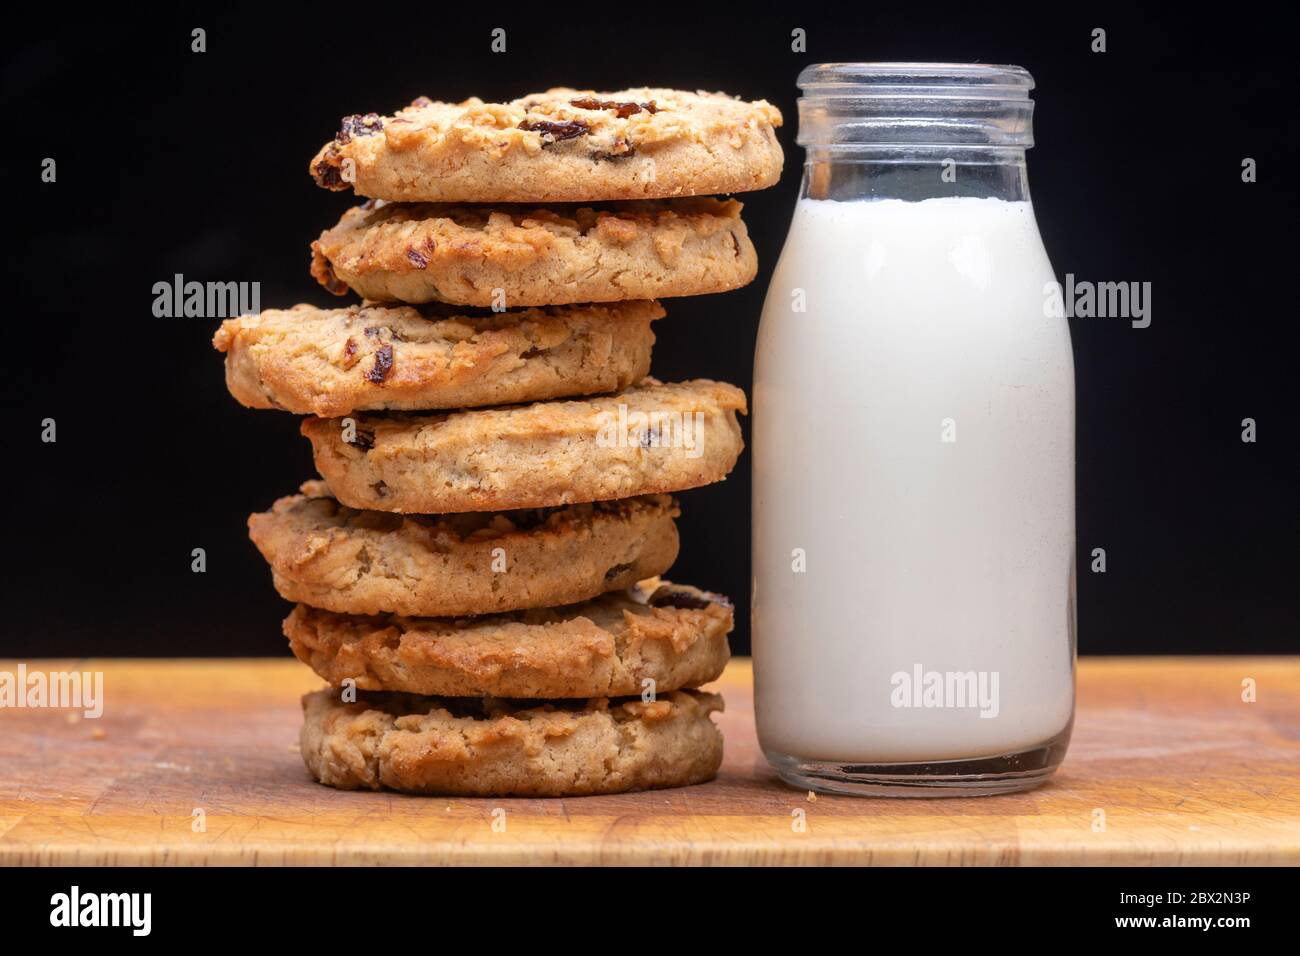 Milk and cookies, homemade fruit and oat cookies with a bottle of milk Stock Photo